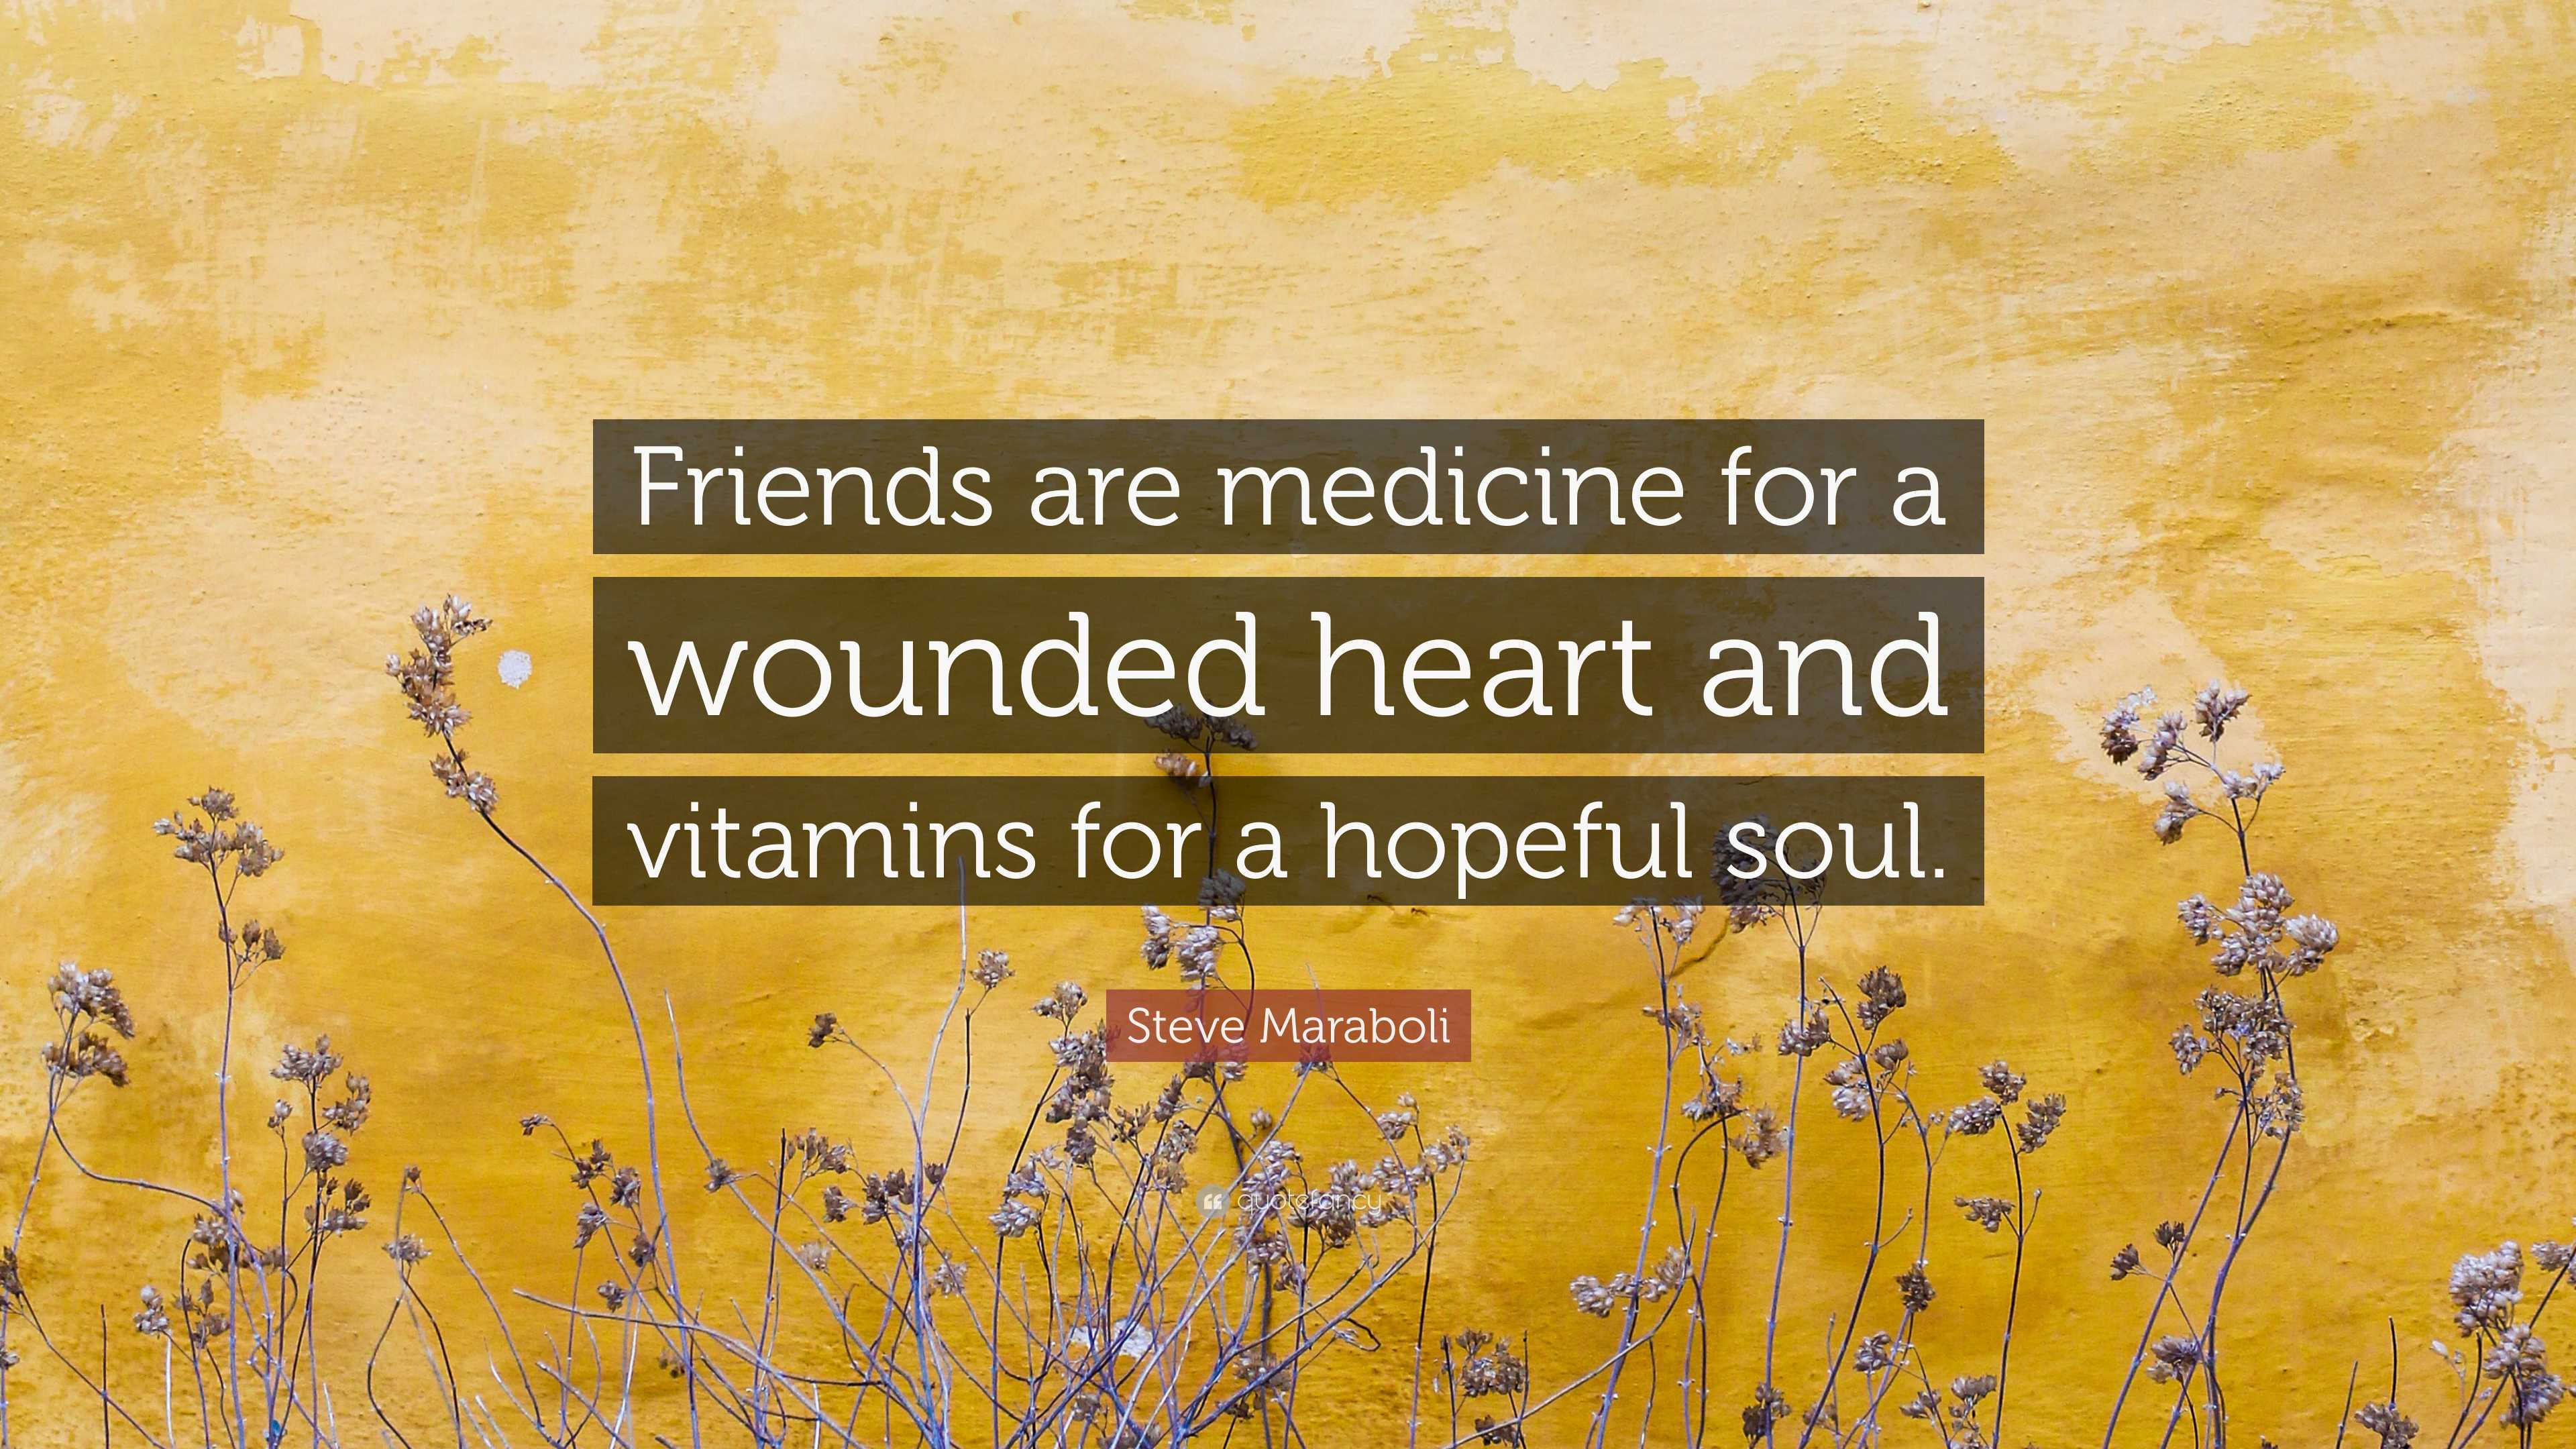 Friends are medicine for a wounded heart and